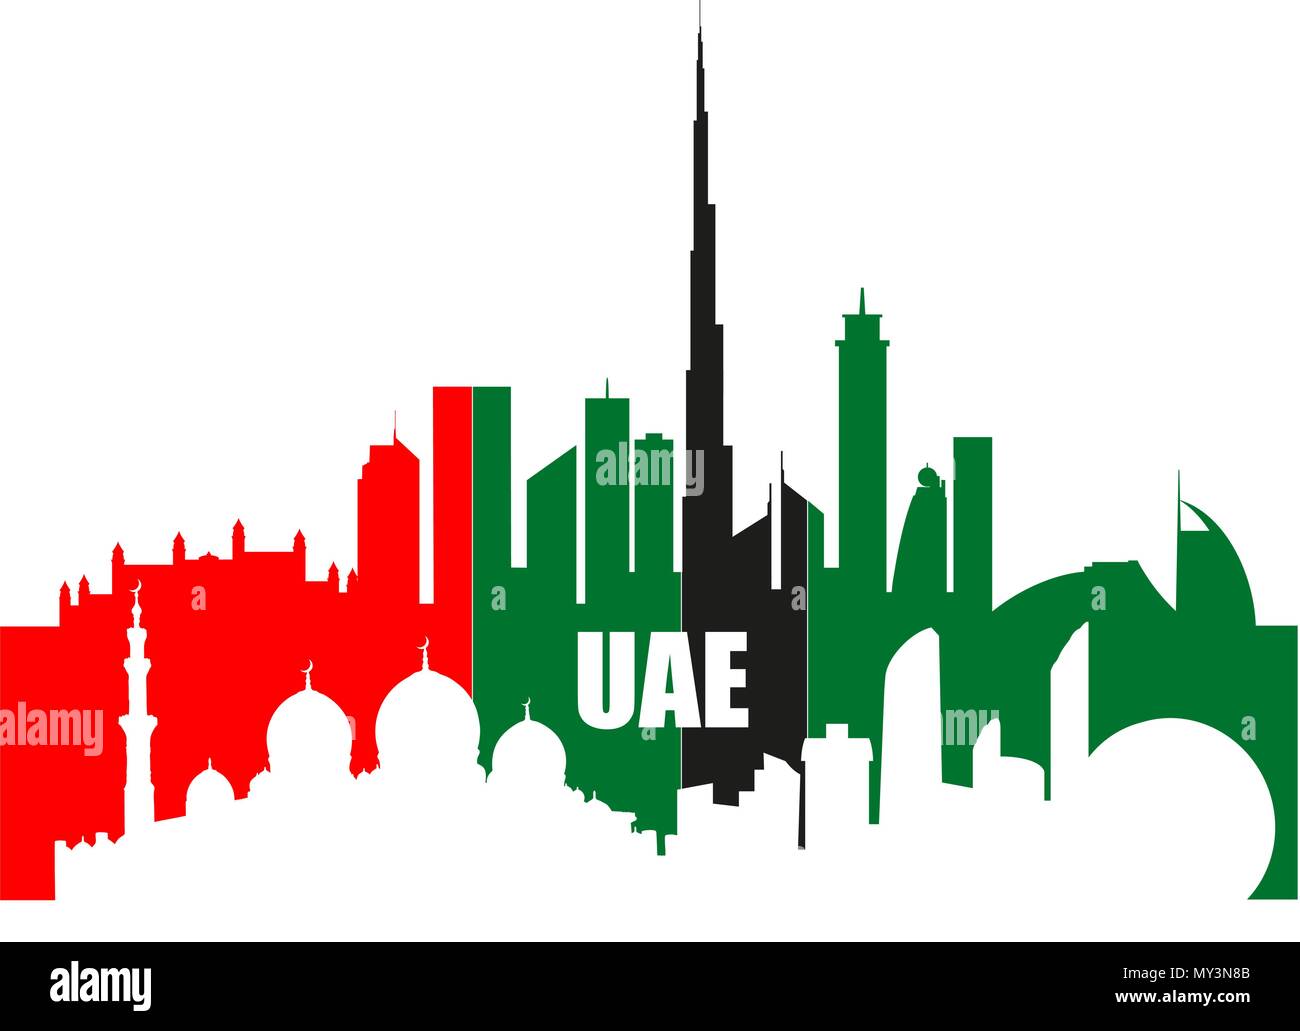 UAE landmarks and skyscrapers silhouettes in national flag colors vector illustration. Dubai and Abu-Dhabi cities skylines. Stock Vector